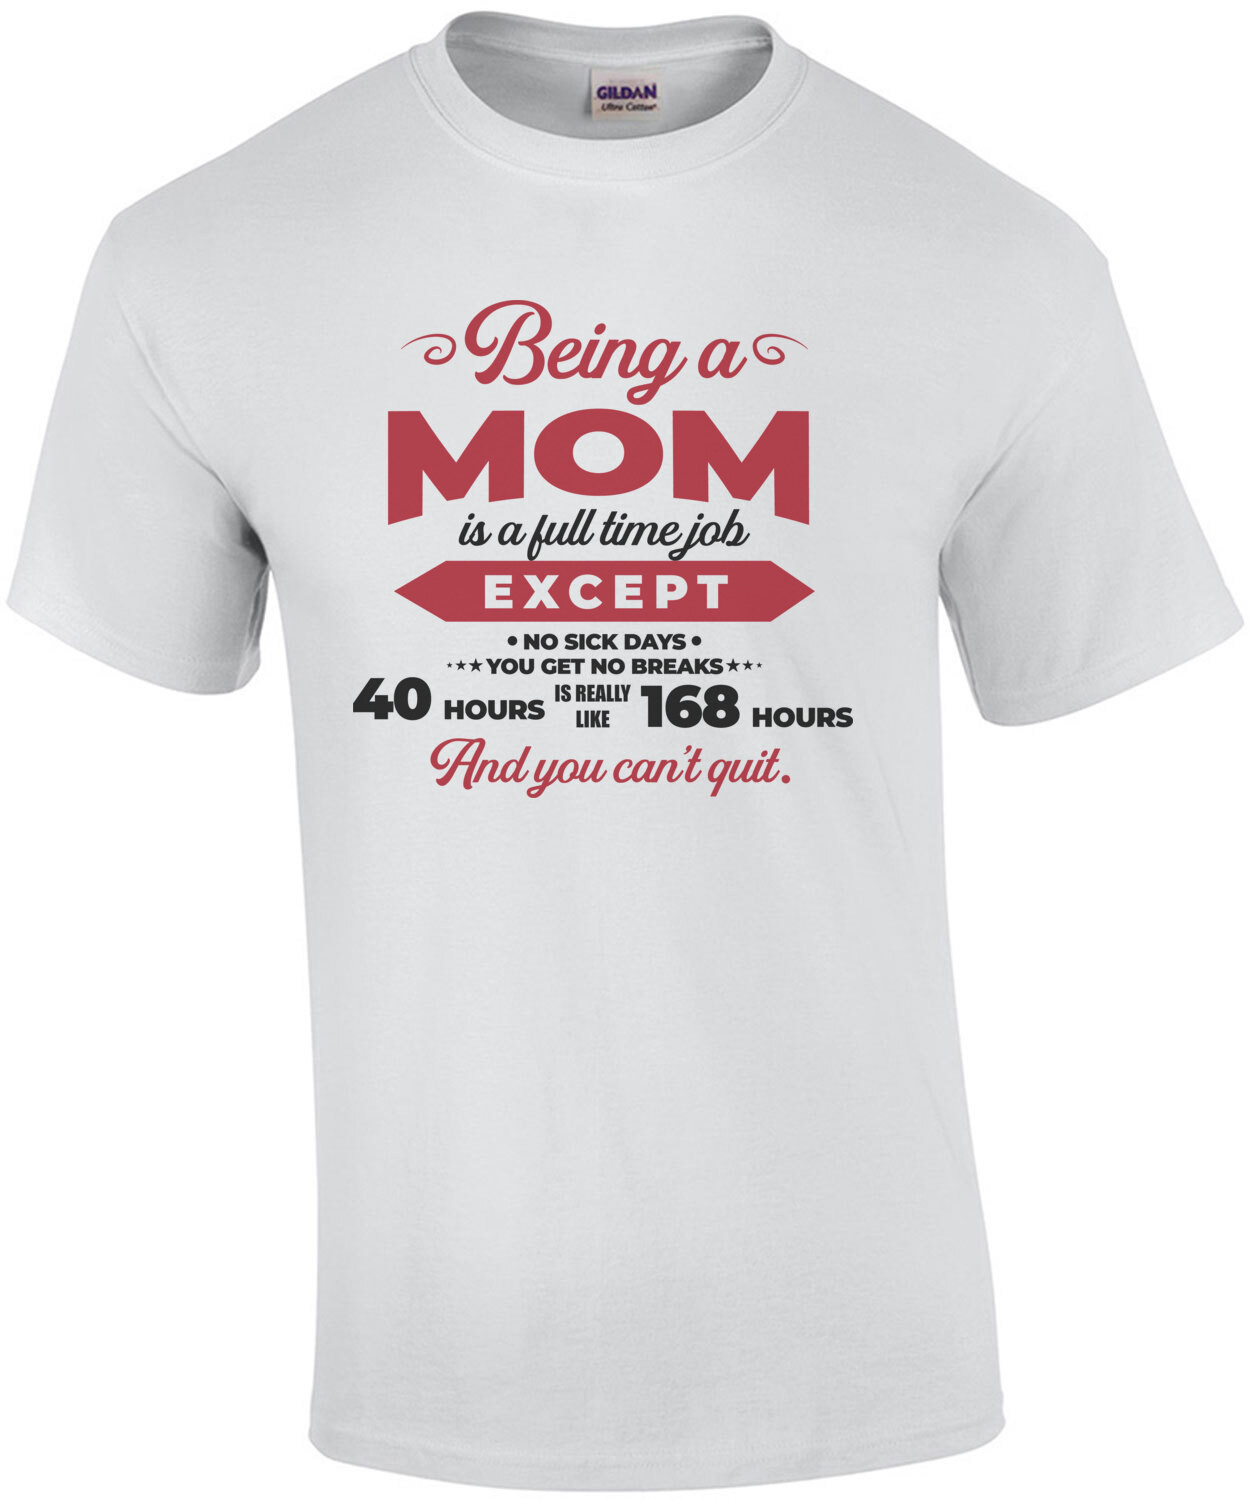 Being a mom is a full time job except no sick days - you get no breaks - 40 hours is really 168 hours and you can't quit. funny mom - mother's day t-shirt